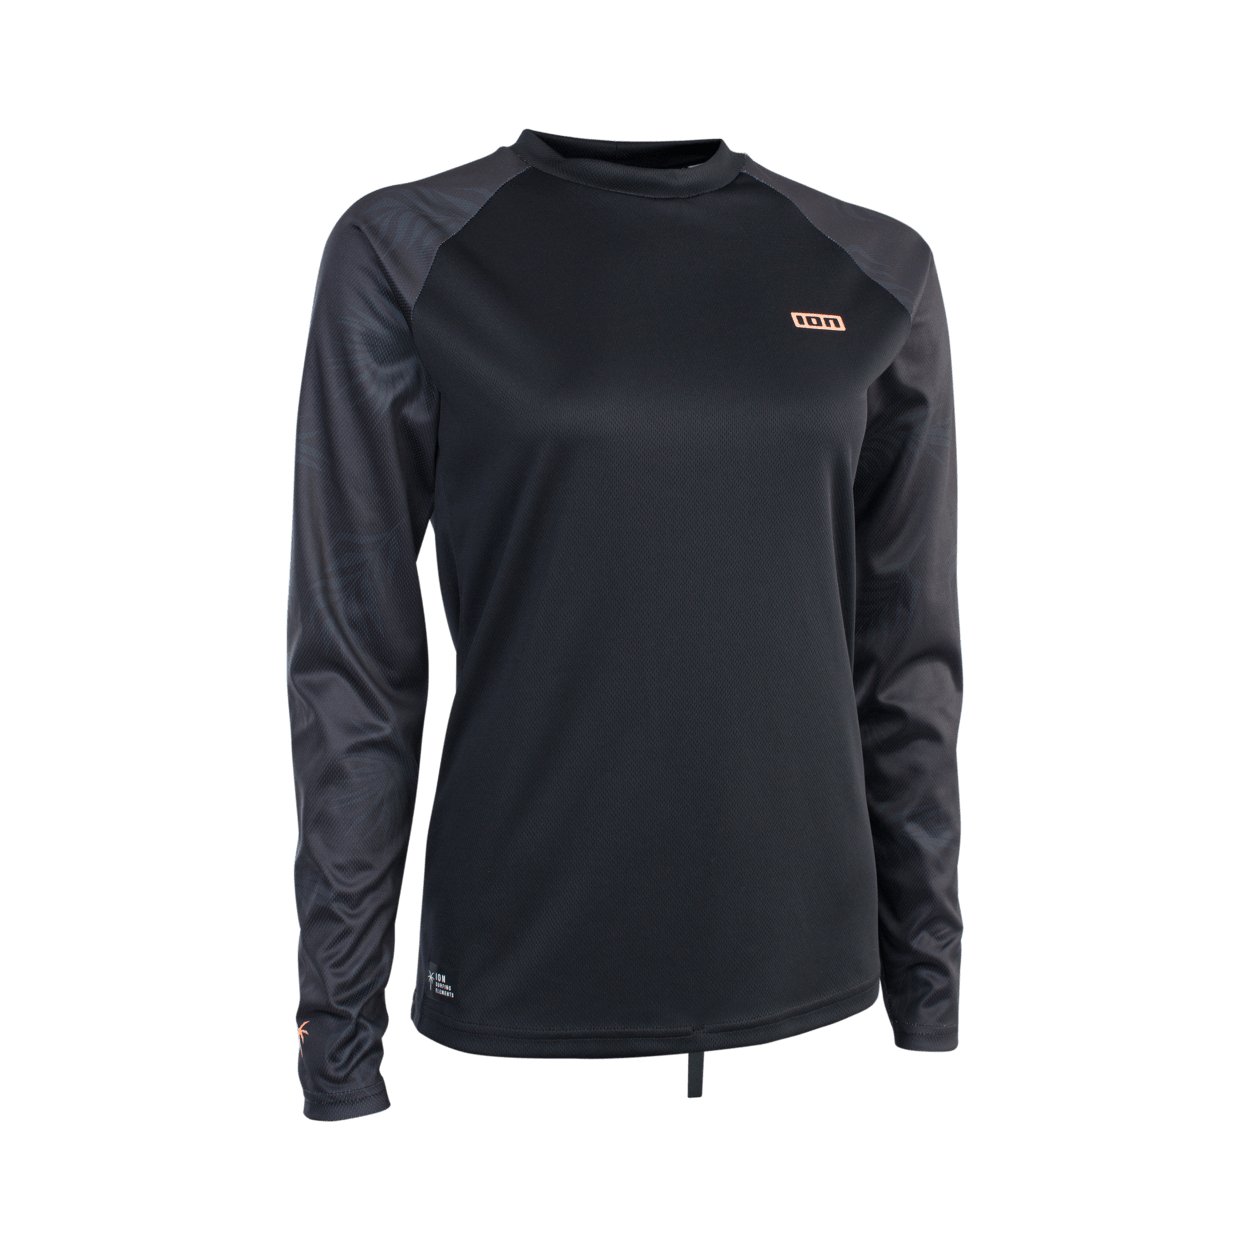 ION Wetshirt LS women 2022 - Worthing Watersports - 9010583051543 - Tops - ION Water